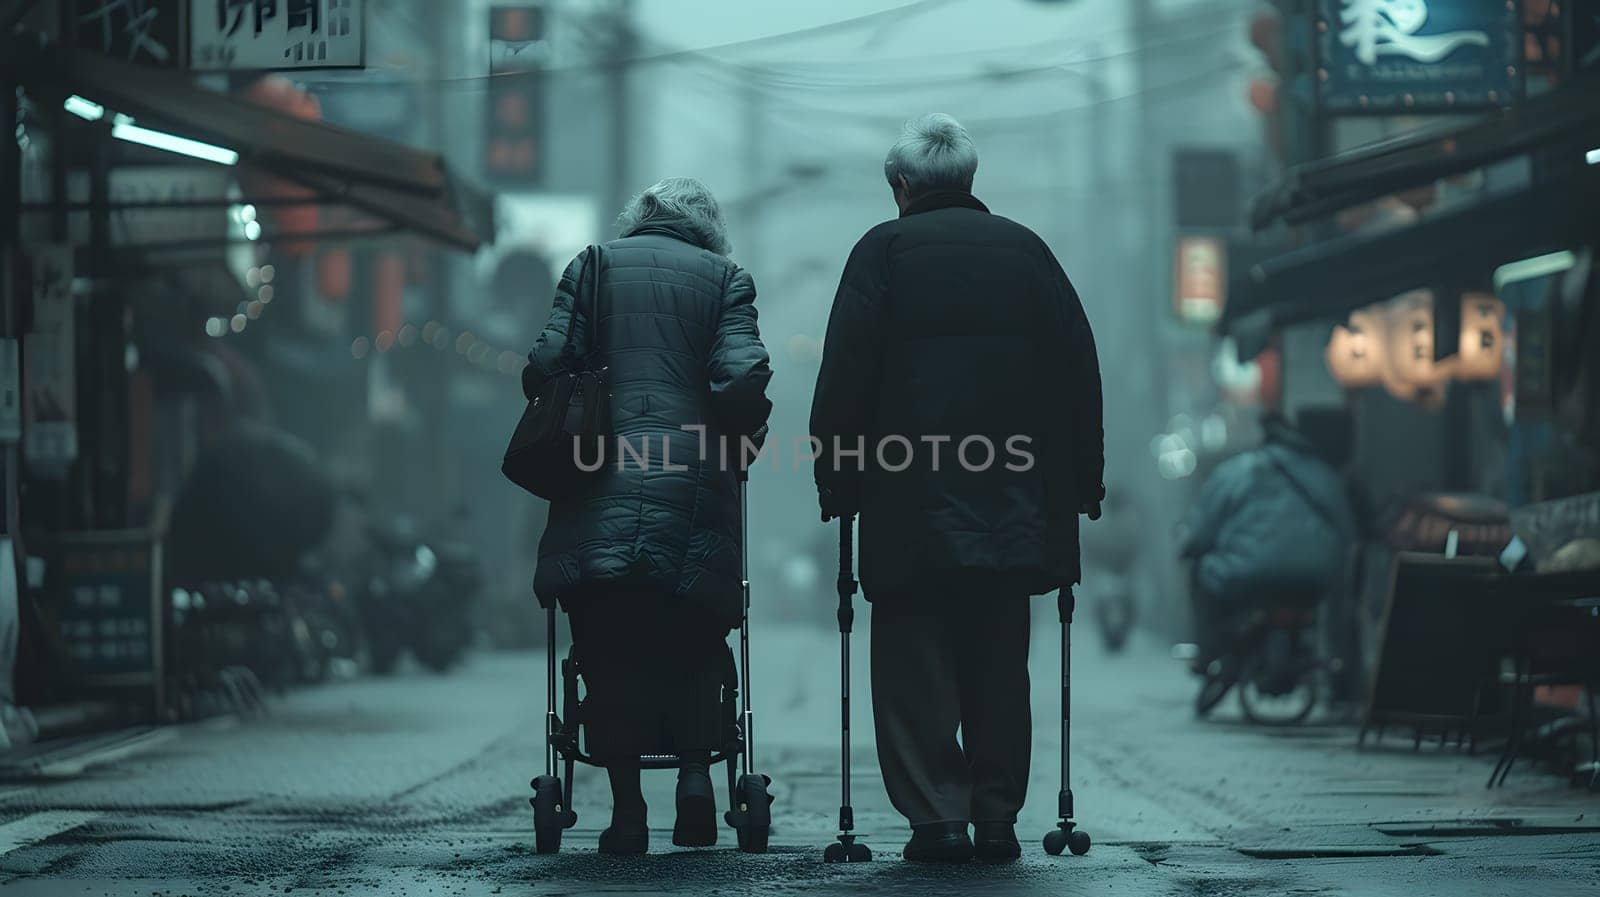 Two elderly pedestrians strolling down a city street on a winter night, surrounded by darkness. They could be mistaken for fictional characters in a midnight art event